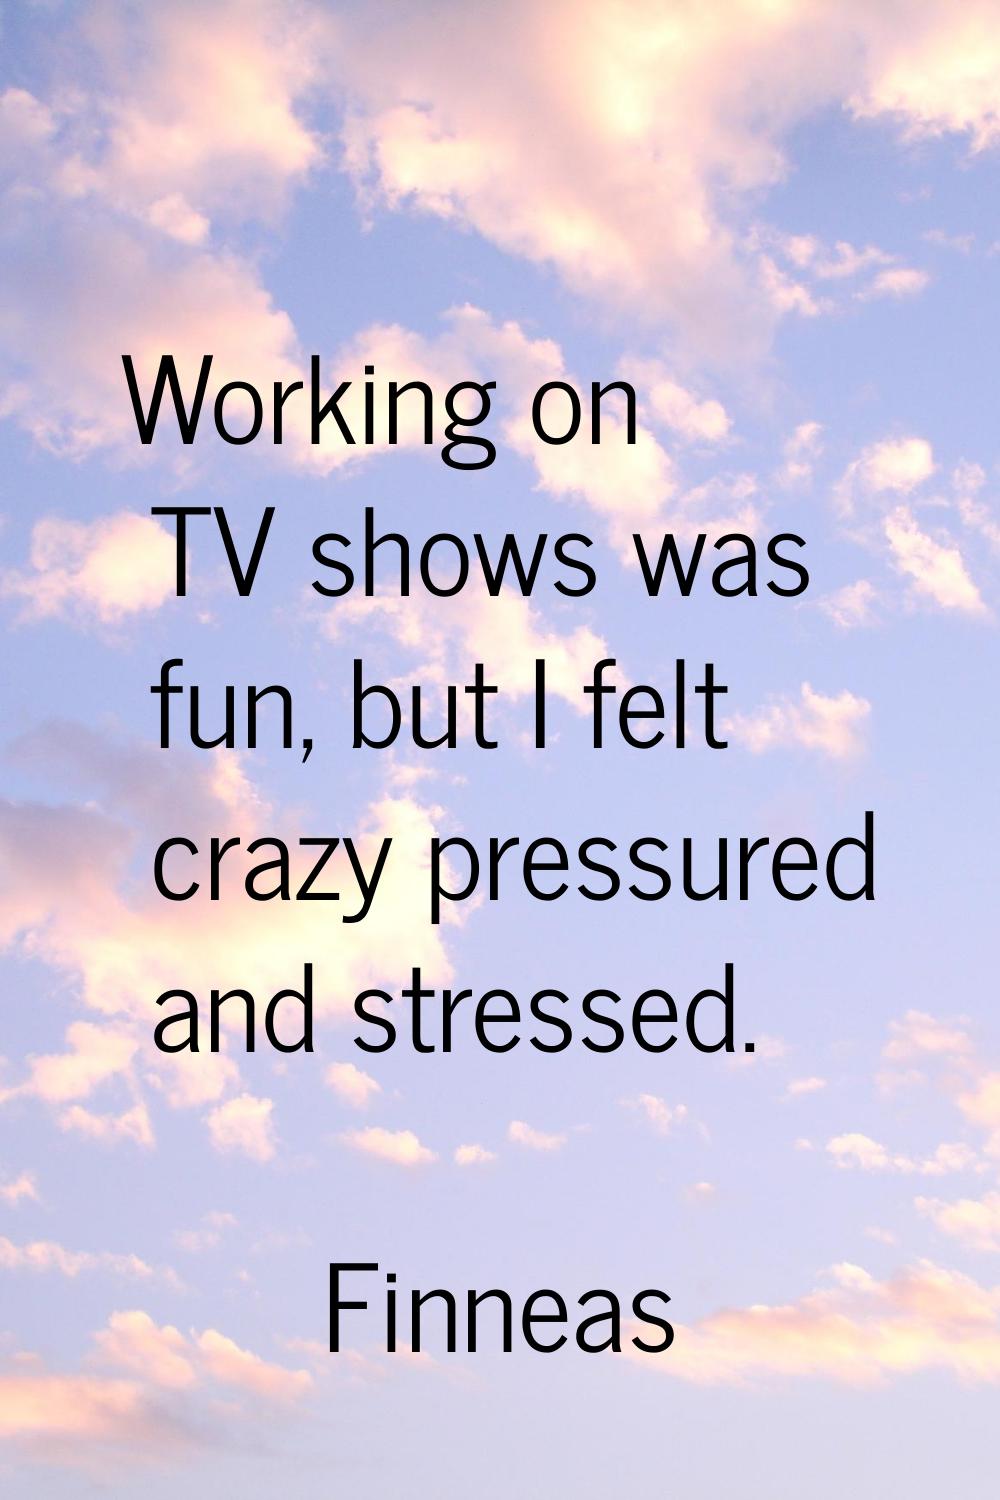 Working on TV shows was fun, but I felt crazy pressured and stressed.